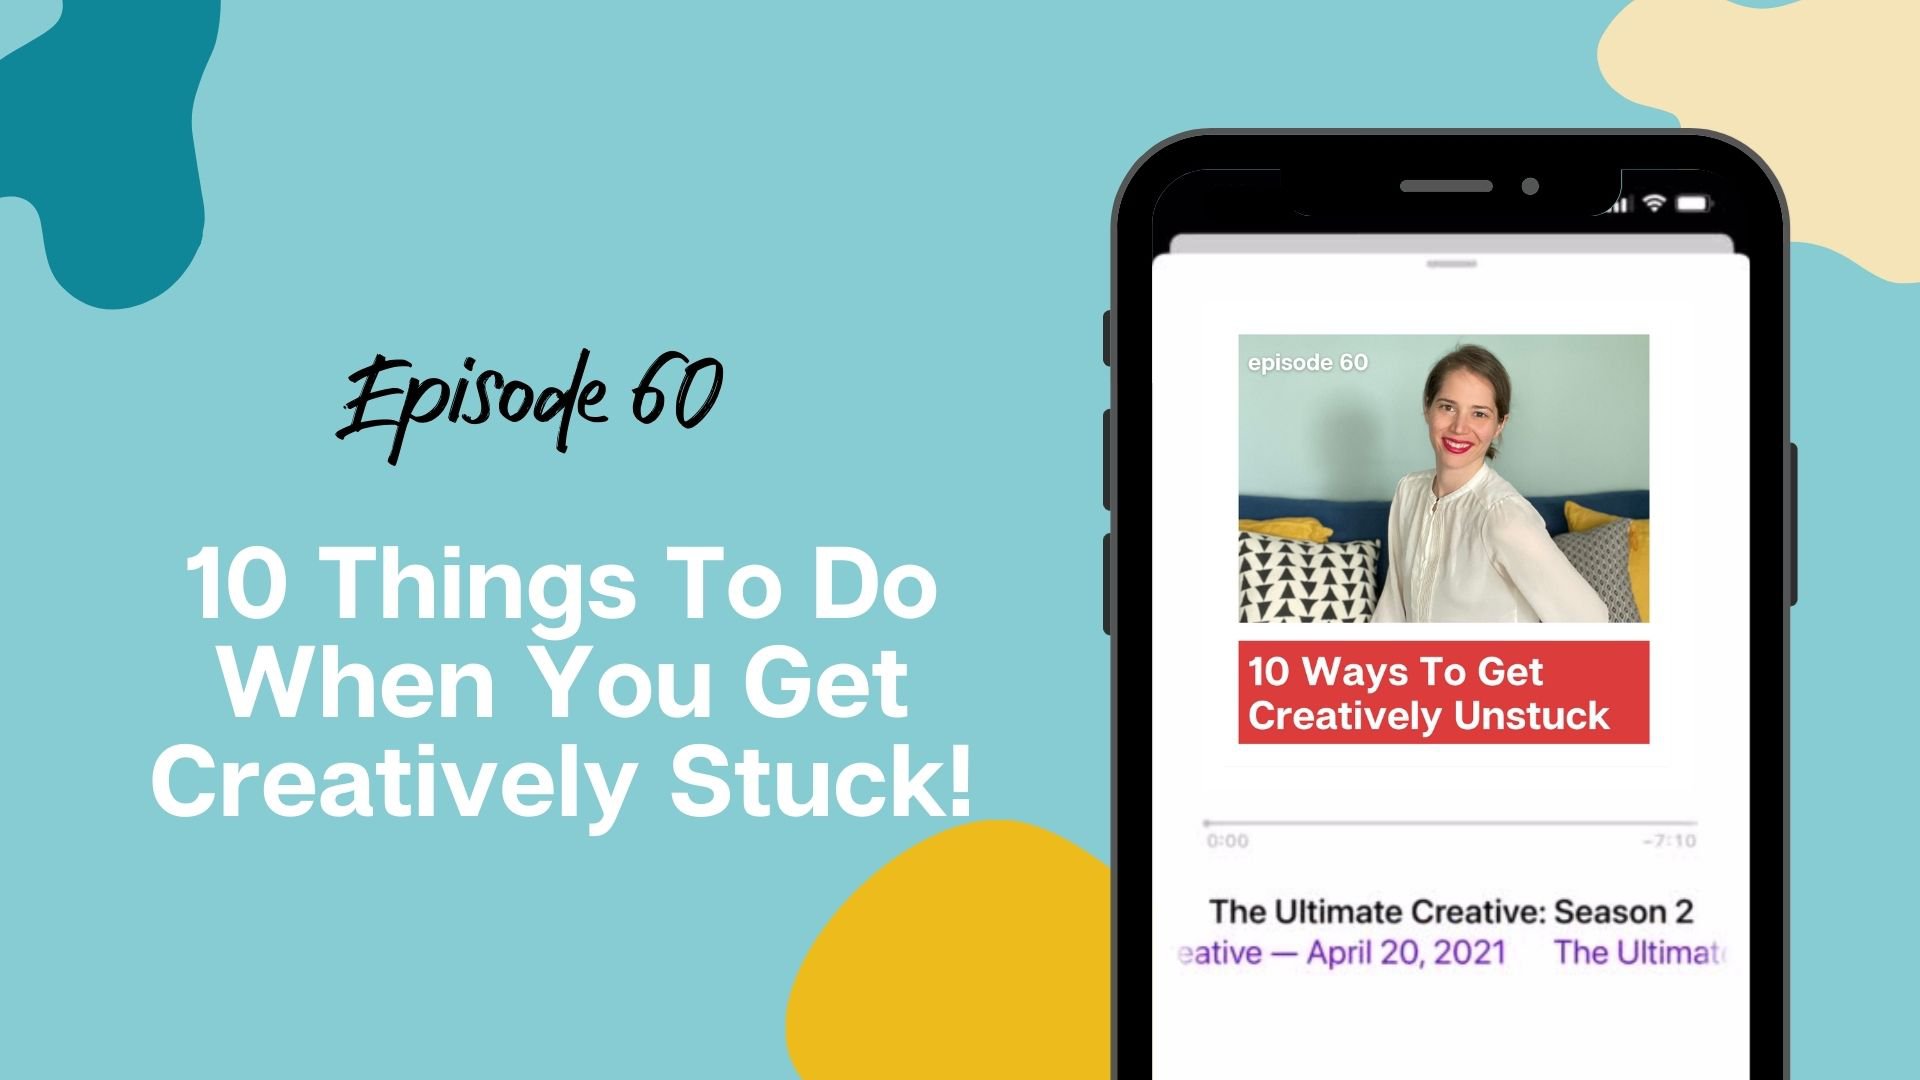 10 Things To Do When You Get Creatively Stuck Featured Image - text on decorative background, mockup of iphone with apple podcasts app playing the episode